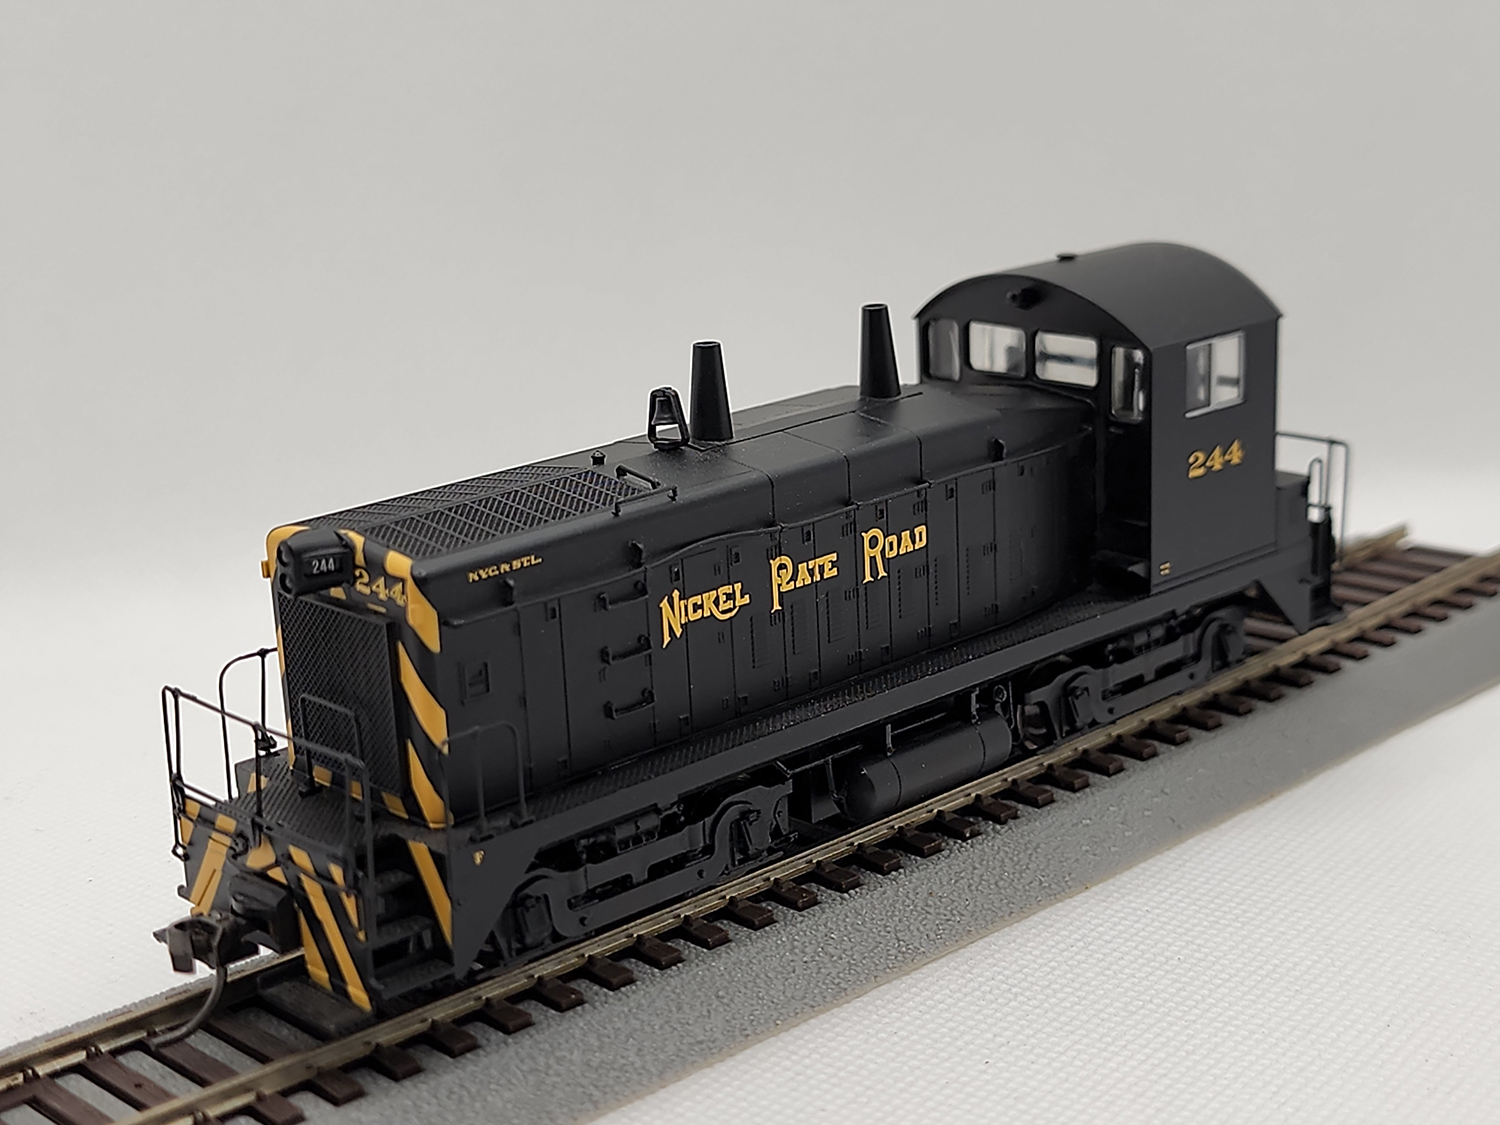 6th view of the Life-Like Nickel Plate Road SW9 Diesel Locomotive #244 in my HO-scale Collection